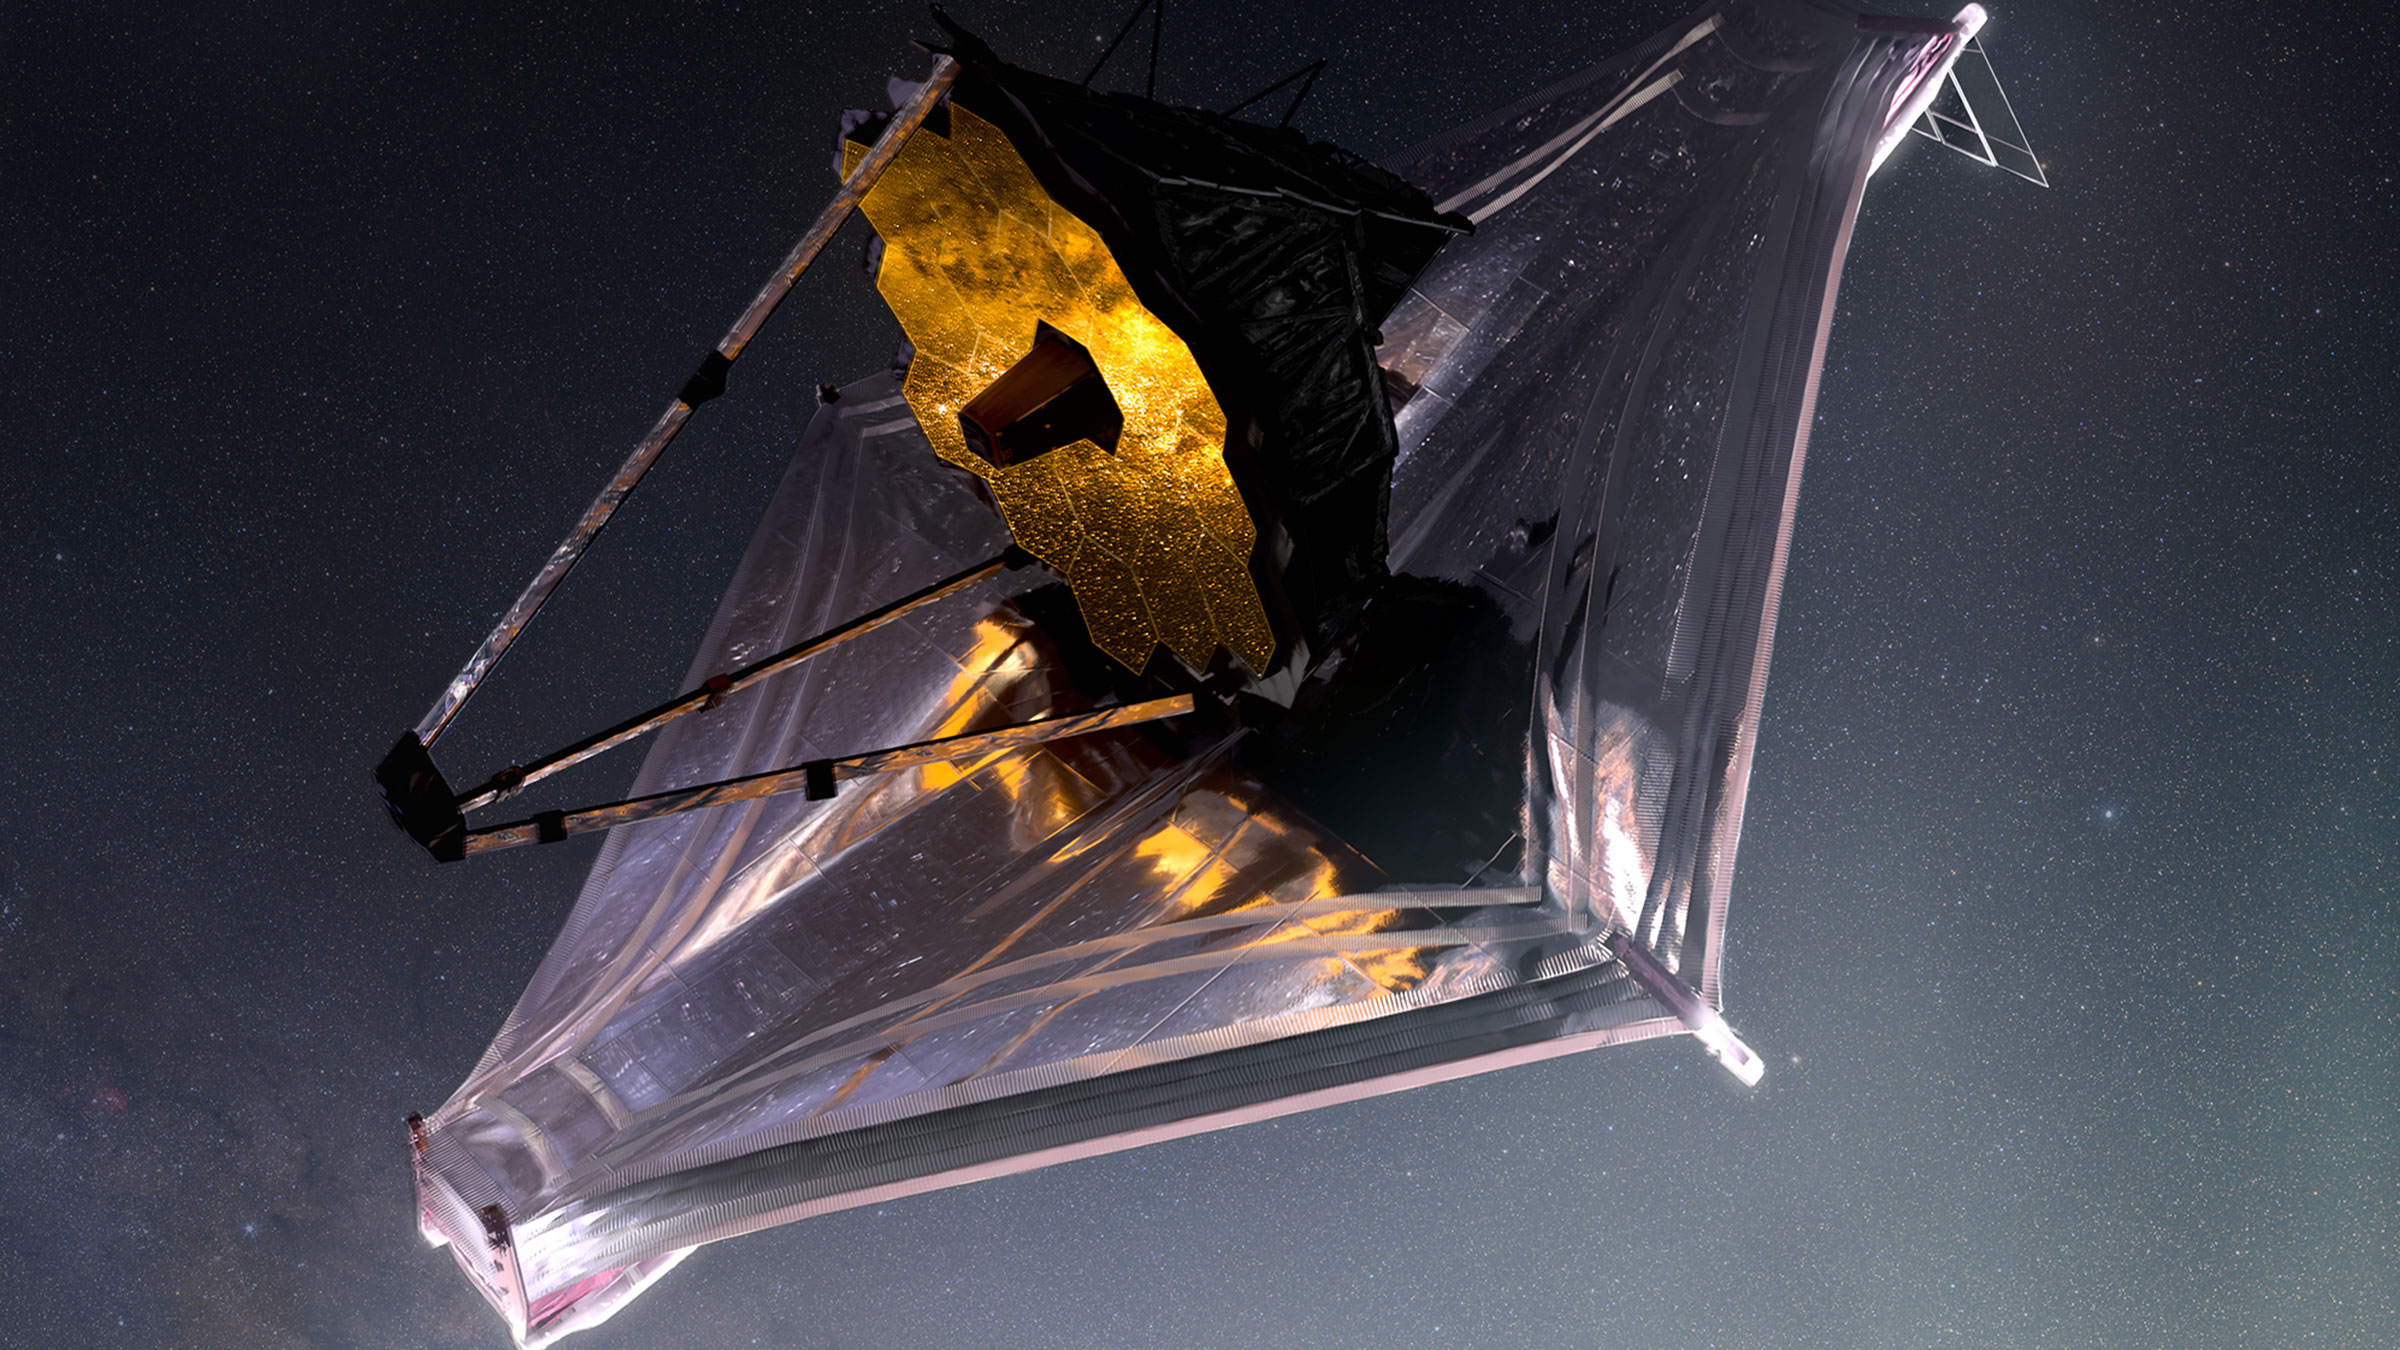 THE WEBB TELESCOPE REDISCOVERS THE UNIVERSE